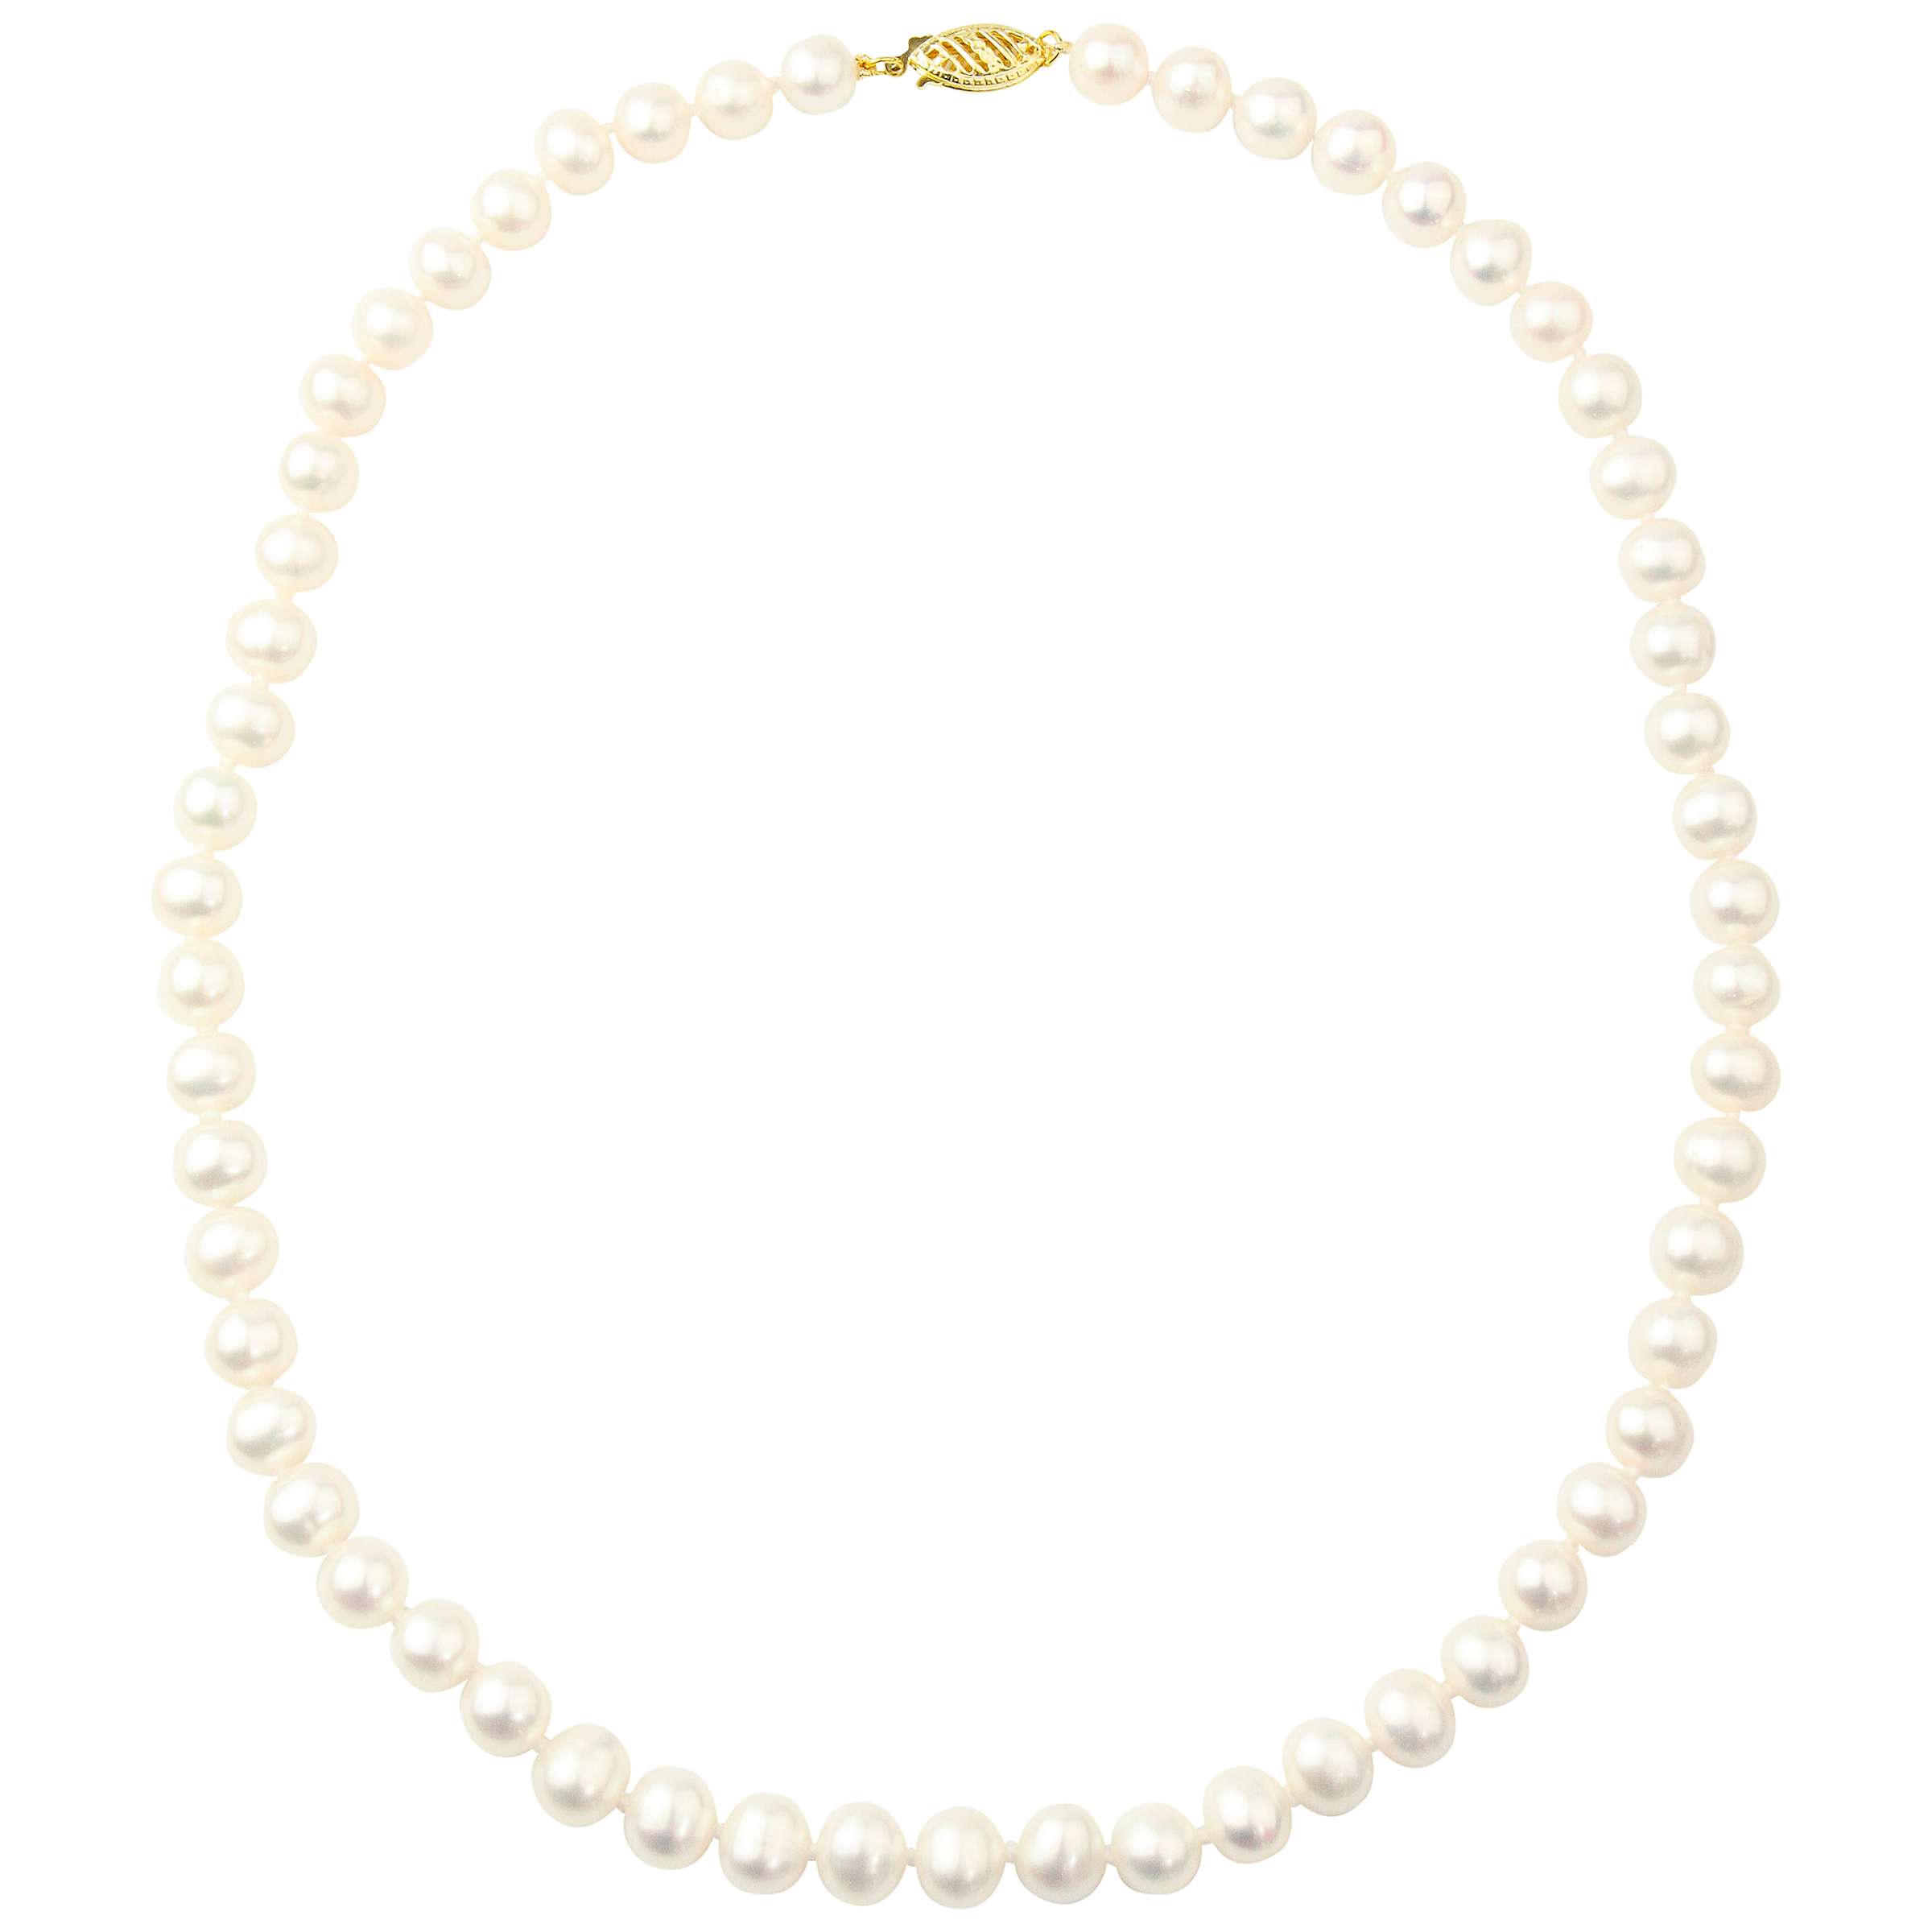 Buy A B Davis 9ct Freshwater Pearl Necklace, White Online at johnlewis.com